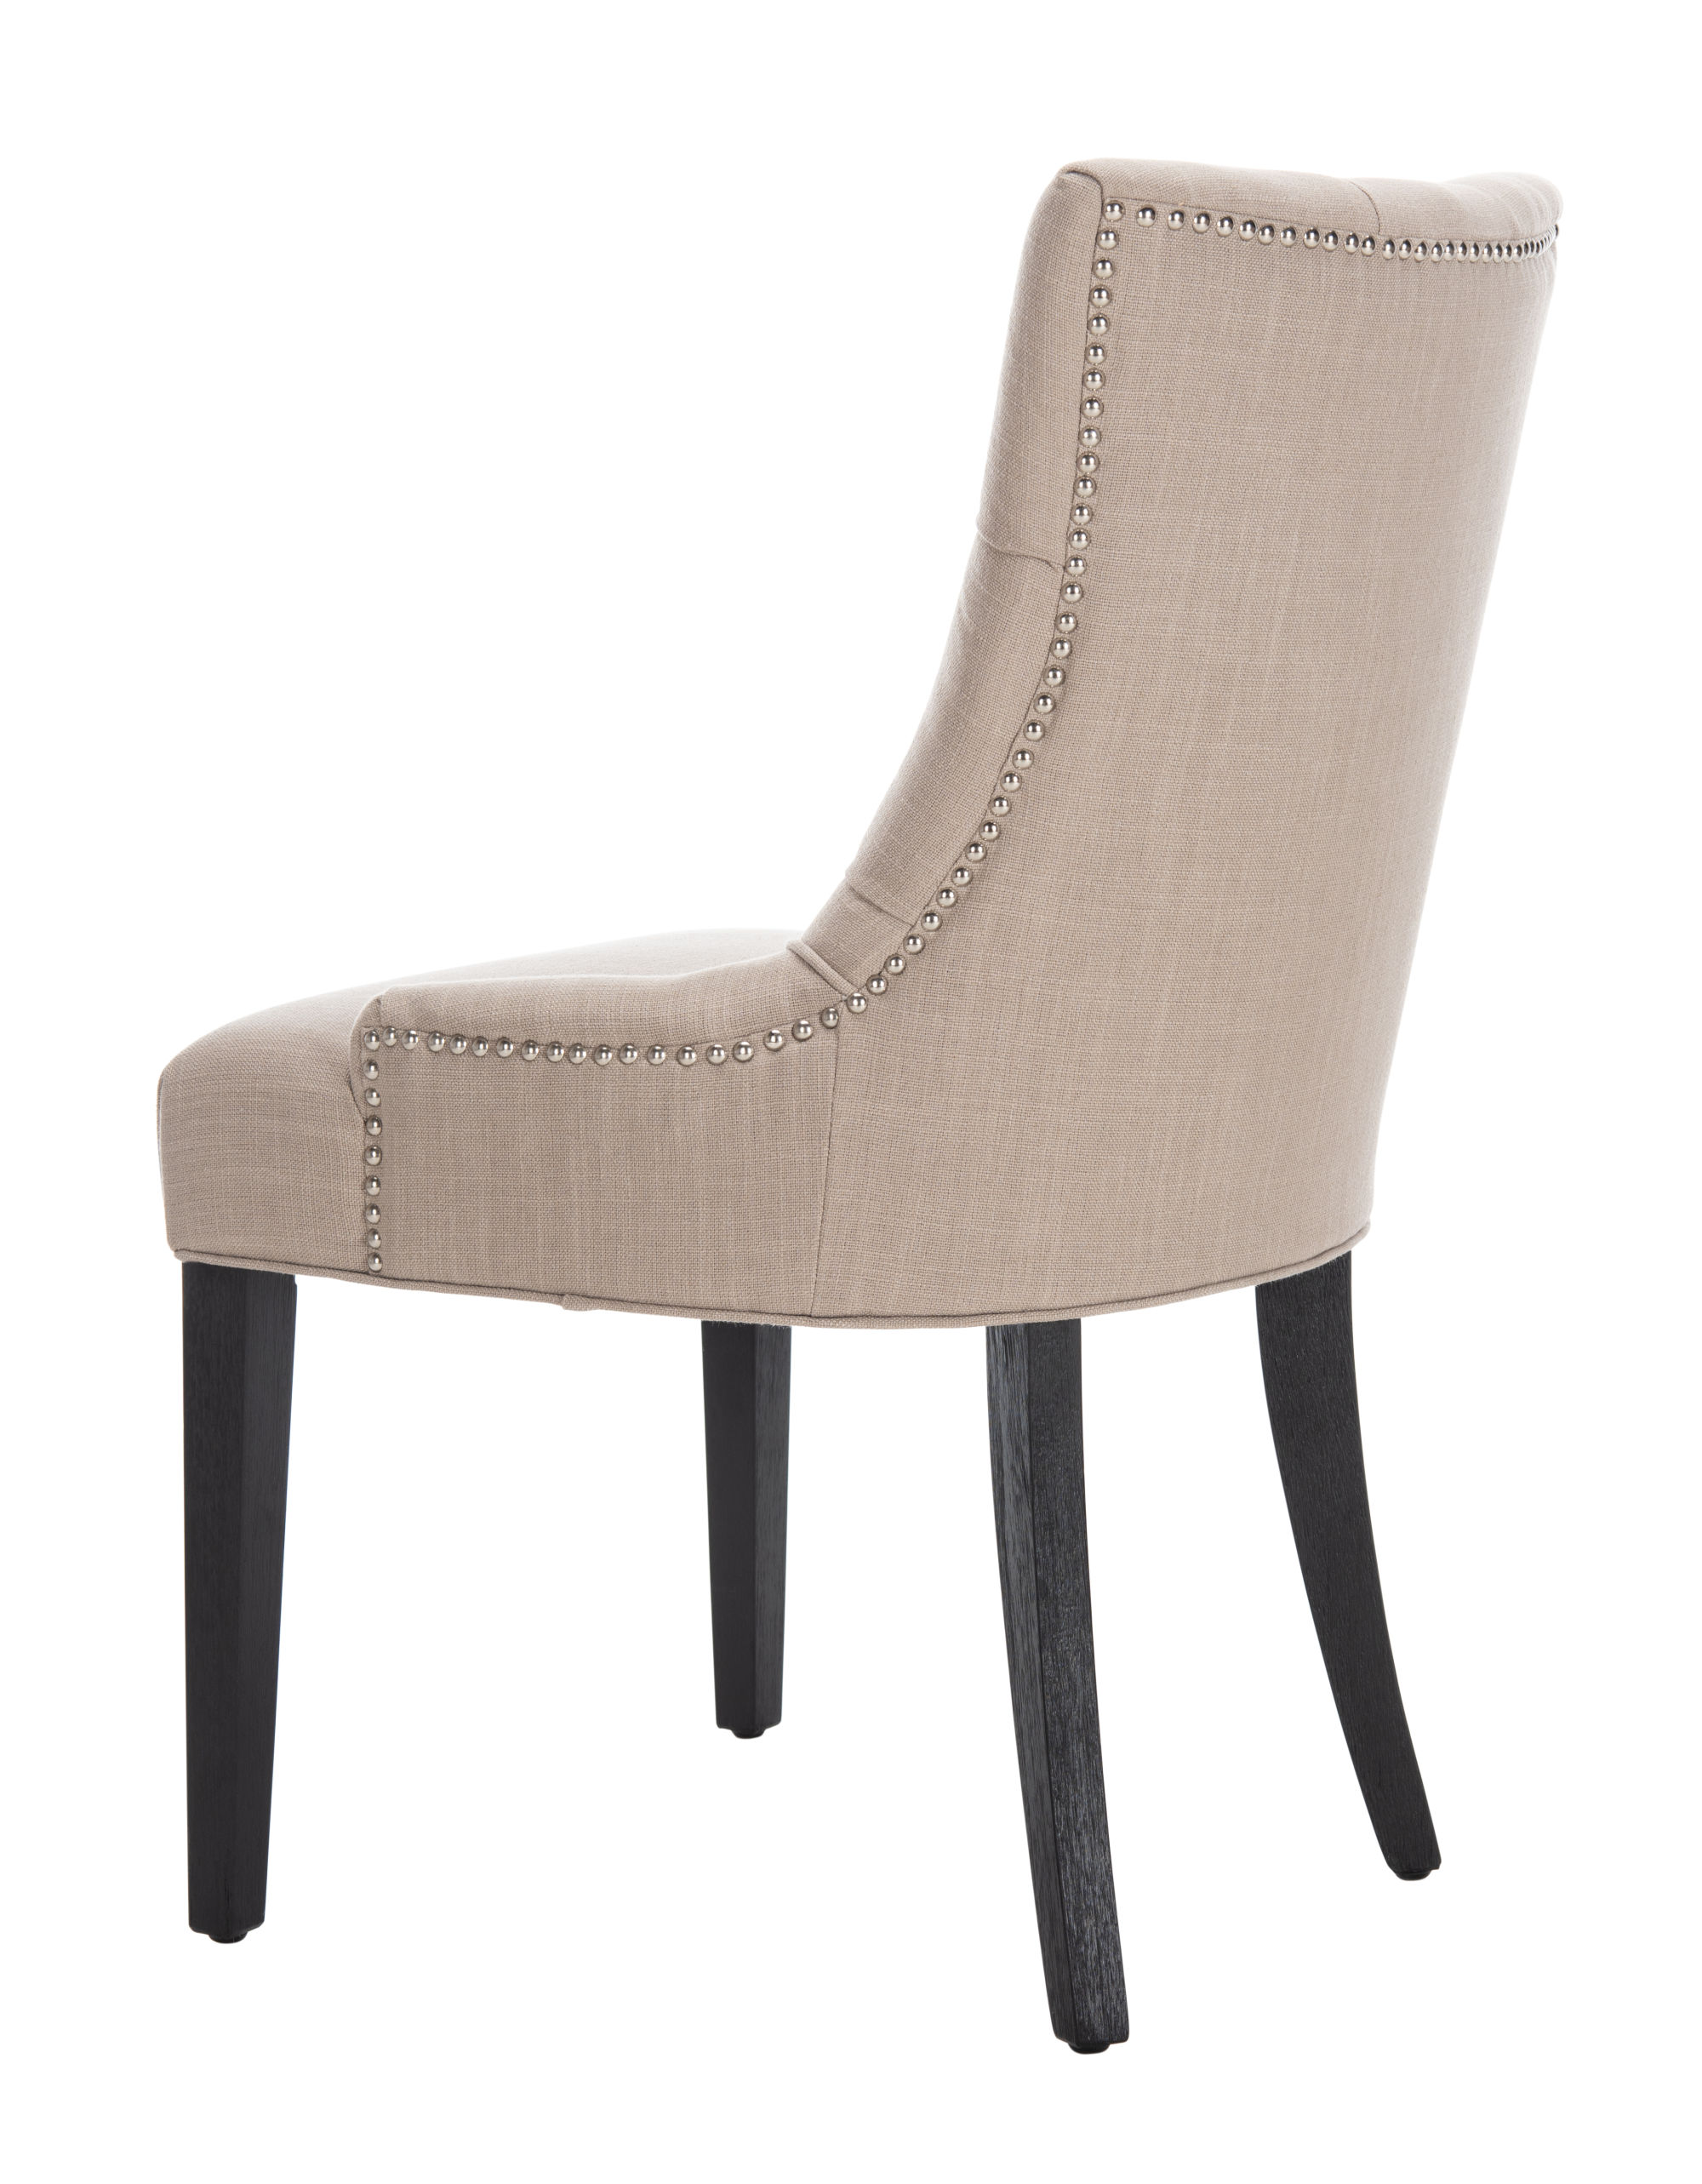 Abby 19 h Tufted Side Chairs Set Of 2 in True Taupe by Safavieh